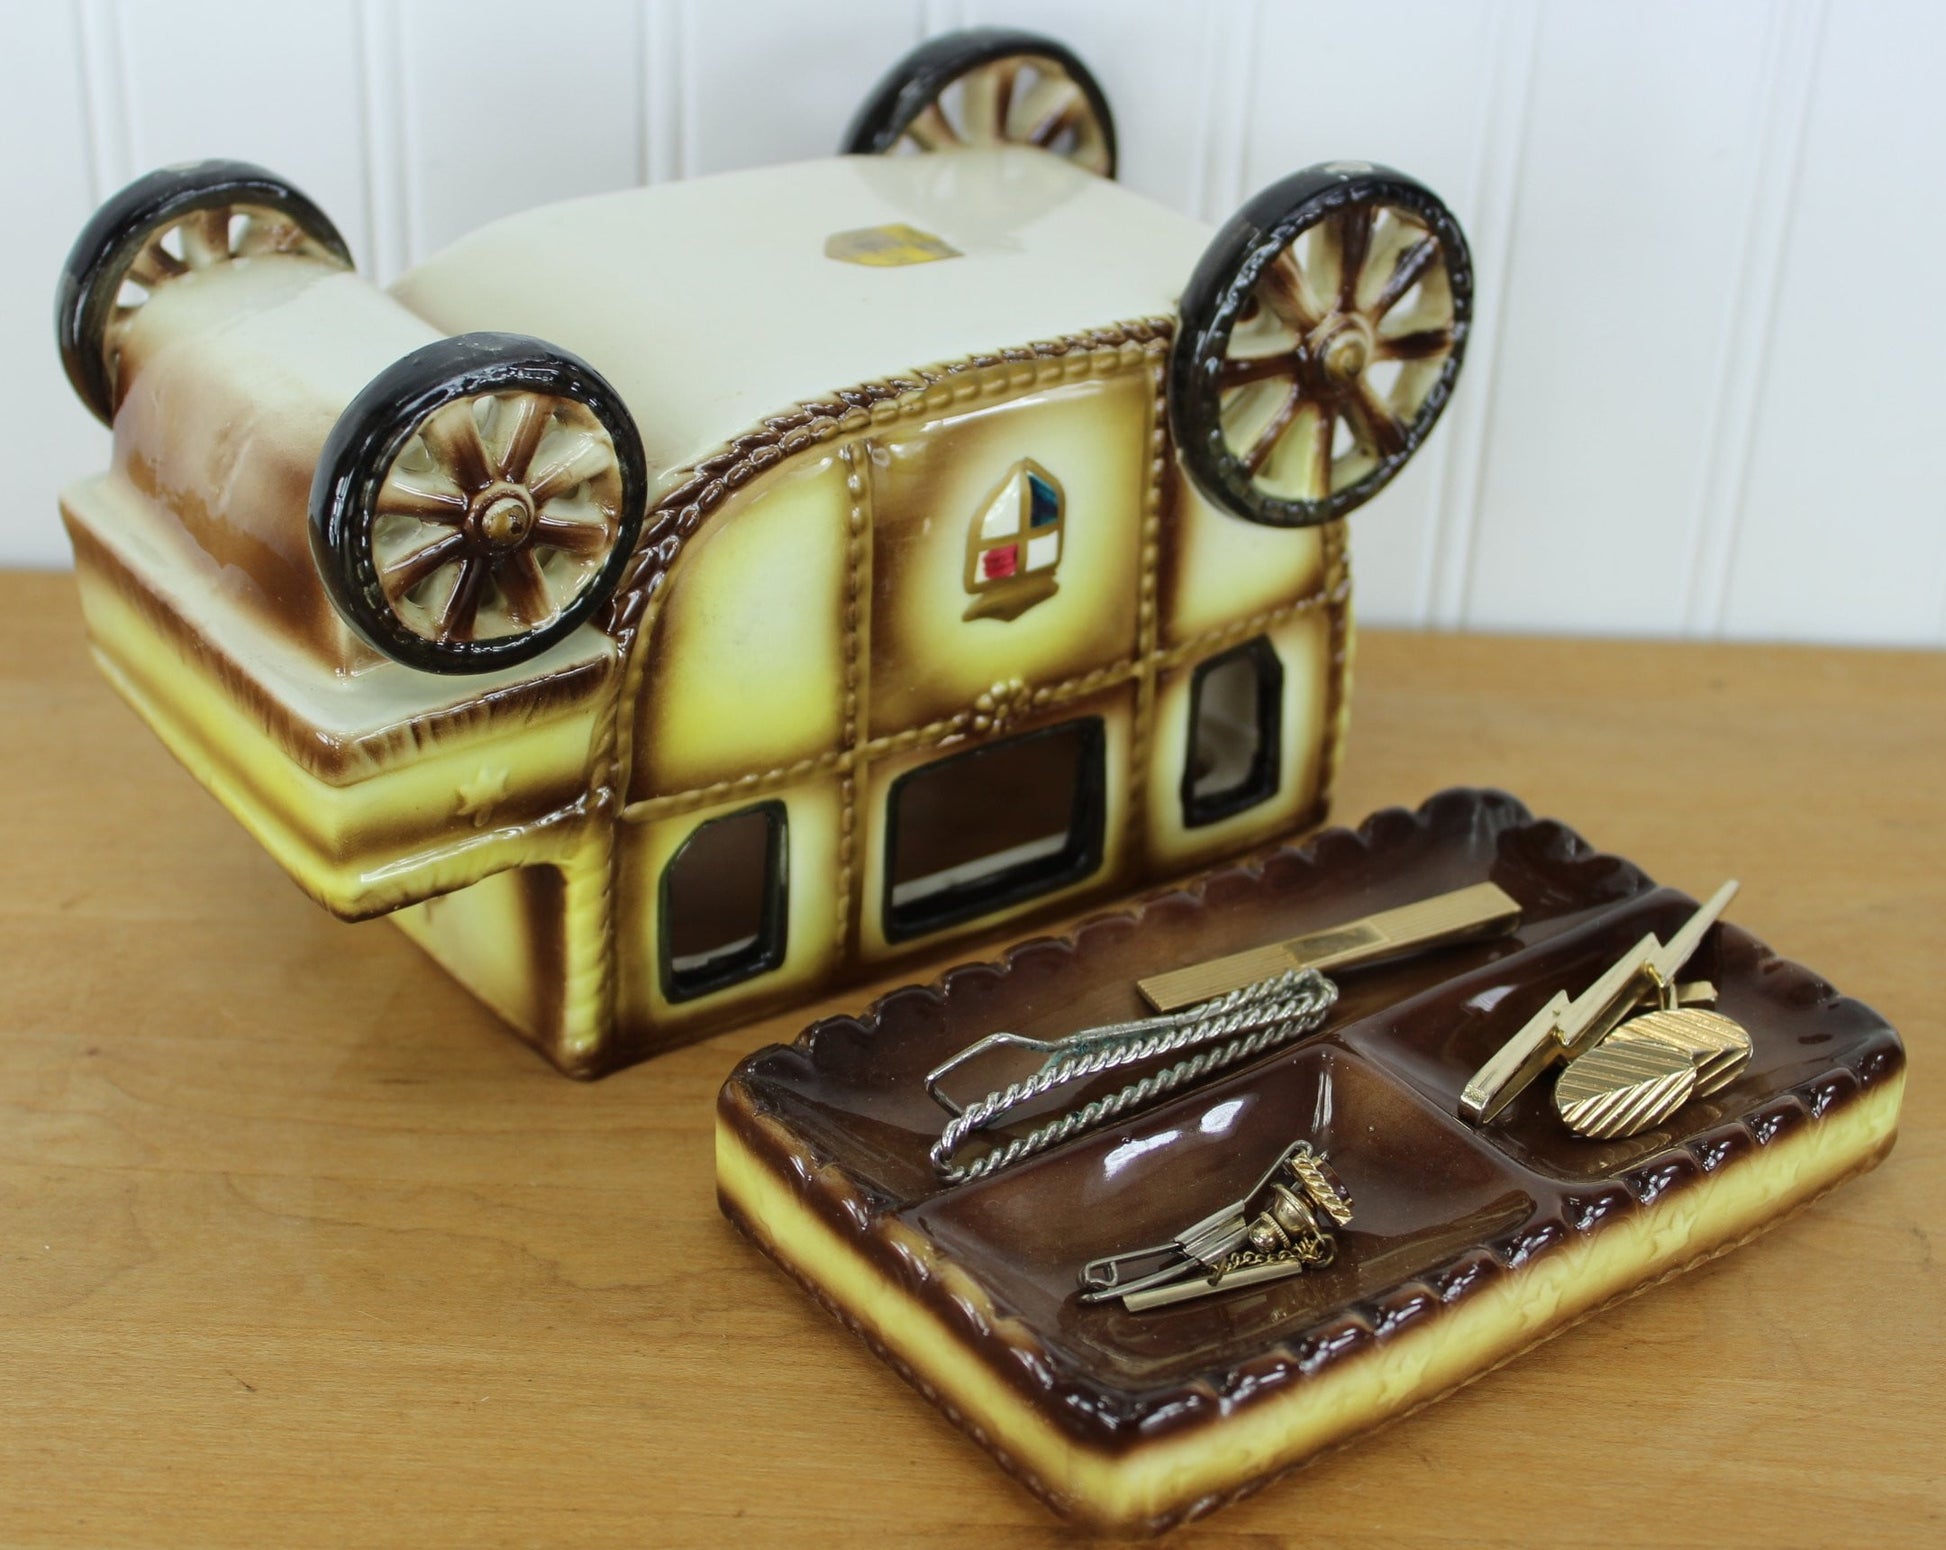 Swank Royal Coach Valet with Swank Men's Jewelry - Vintage fun gift